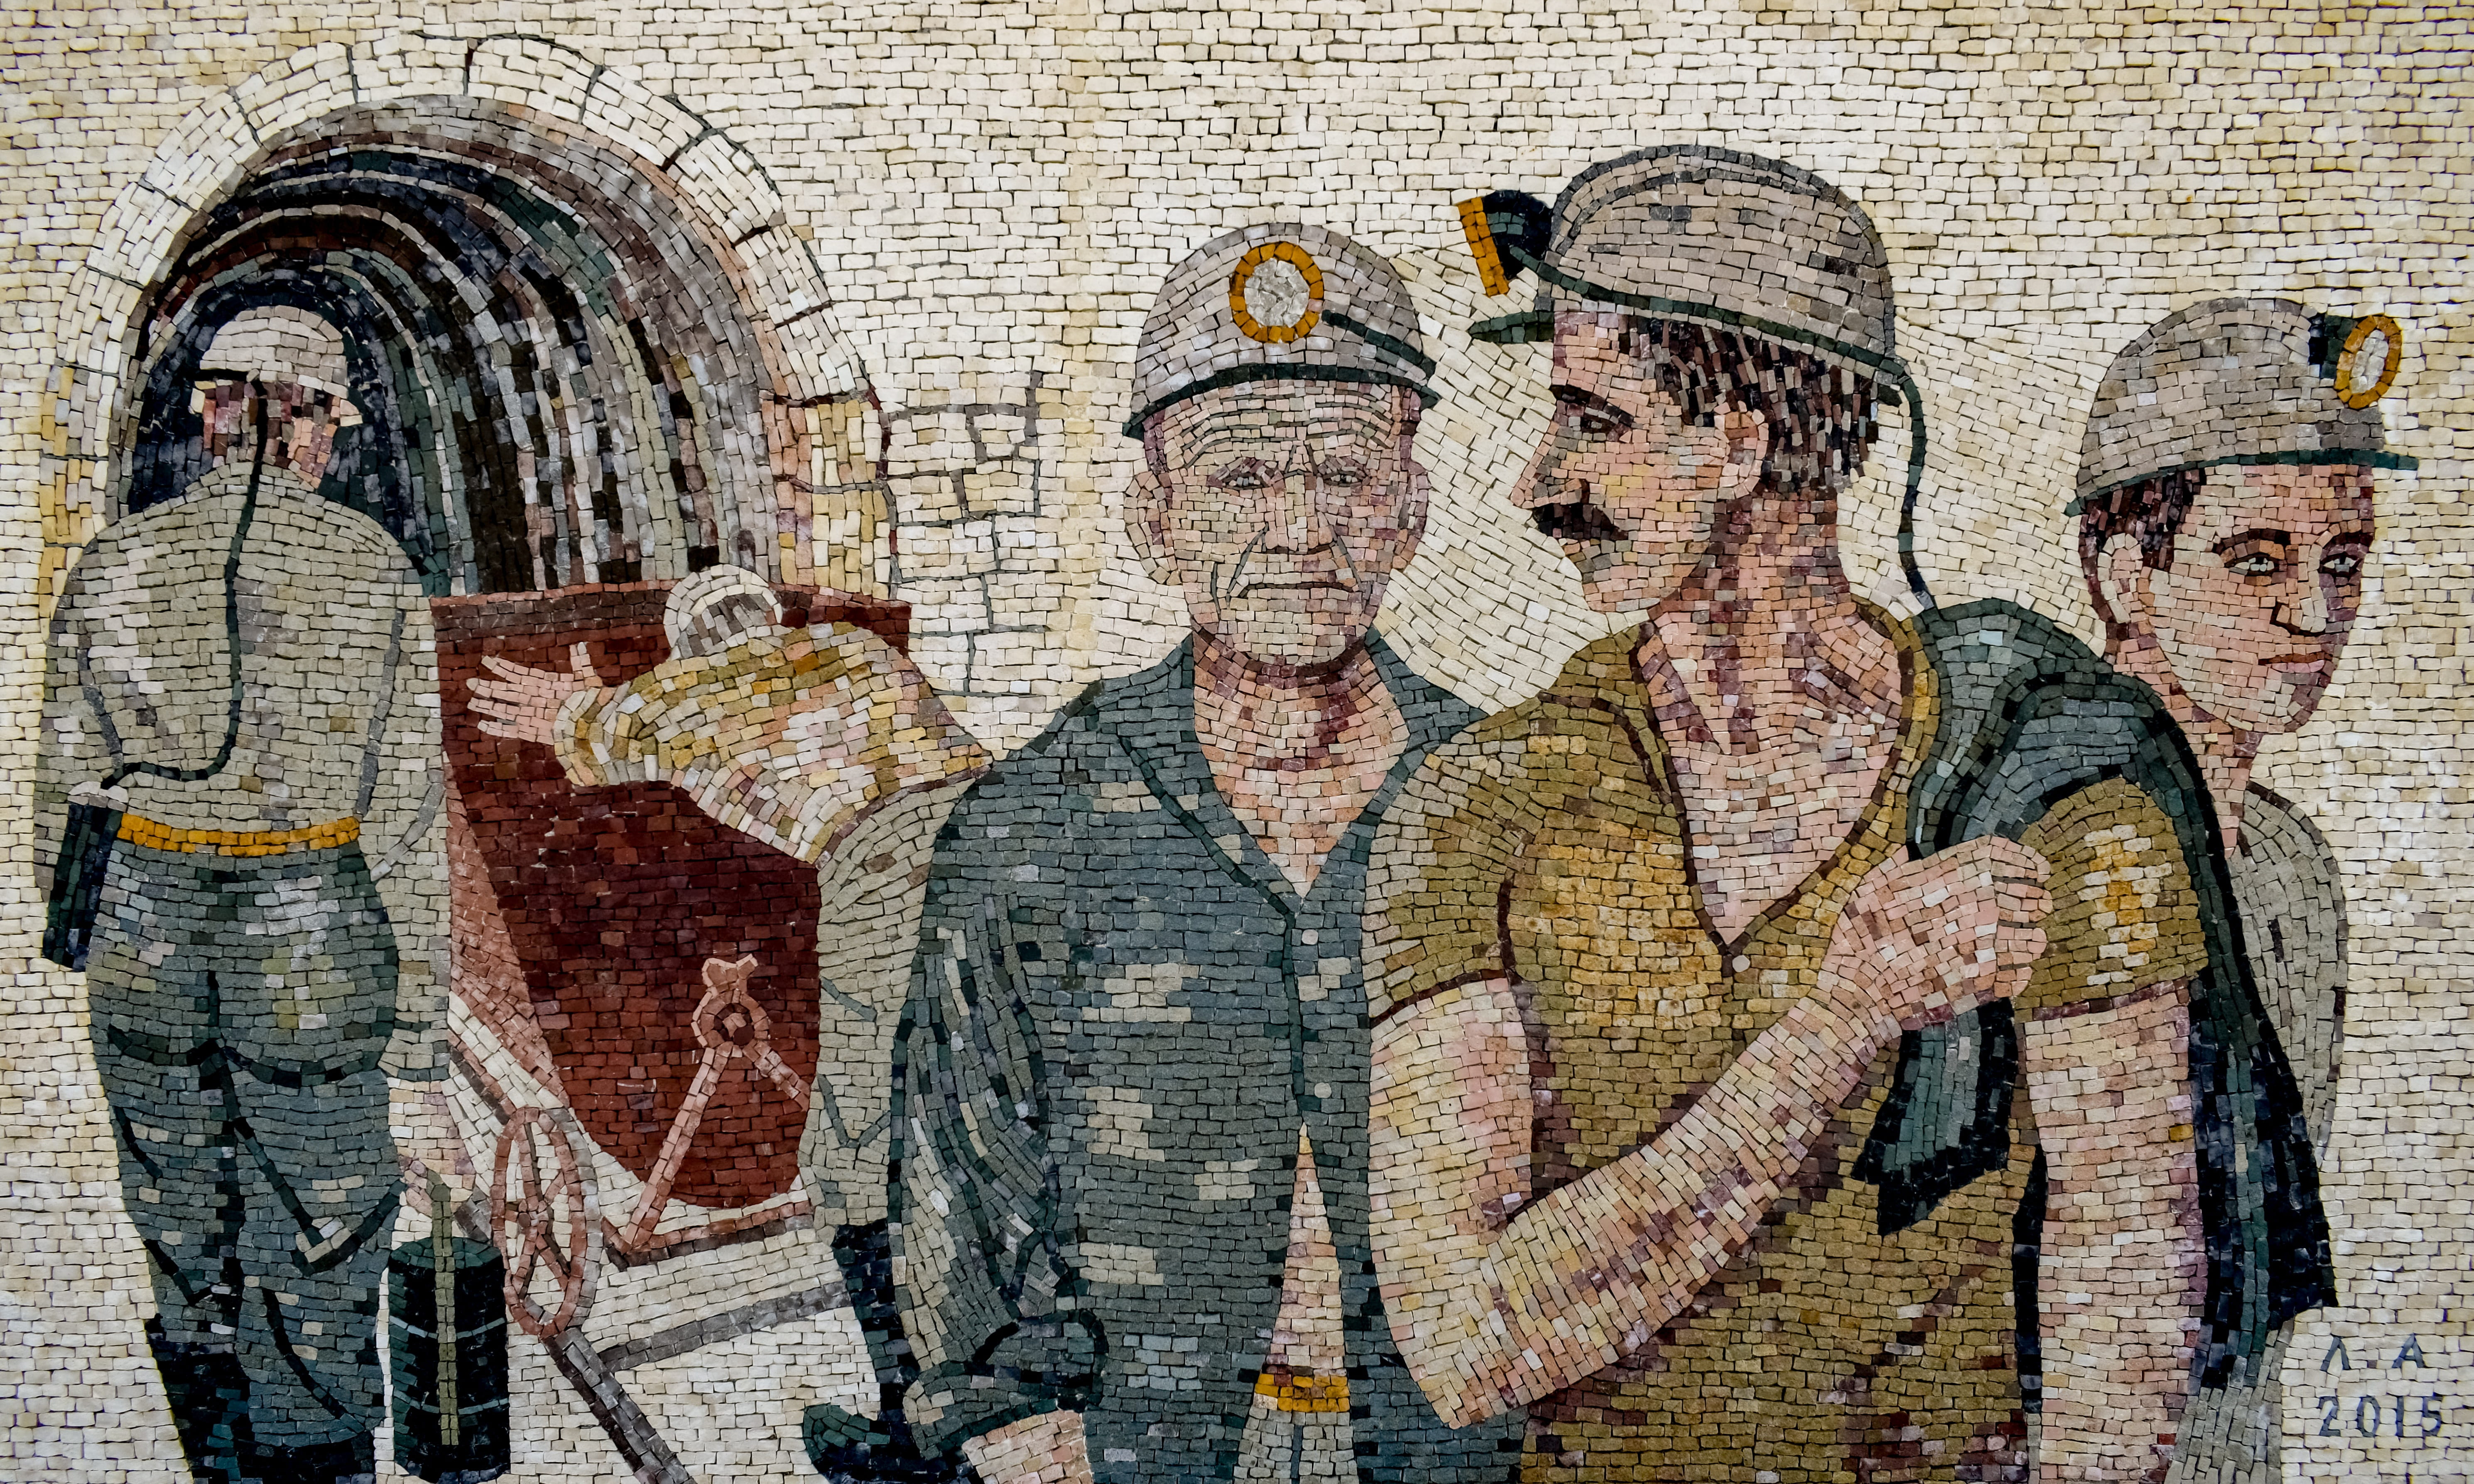 miners, workers, men, wall, mosaic, art, working, agrokipia